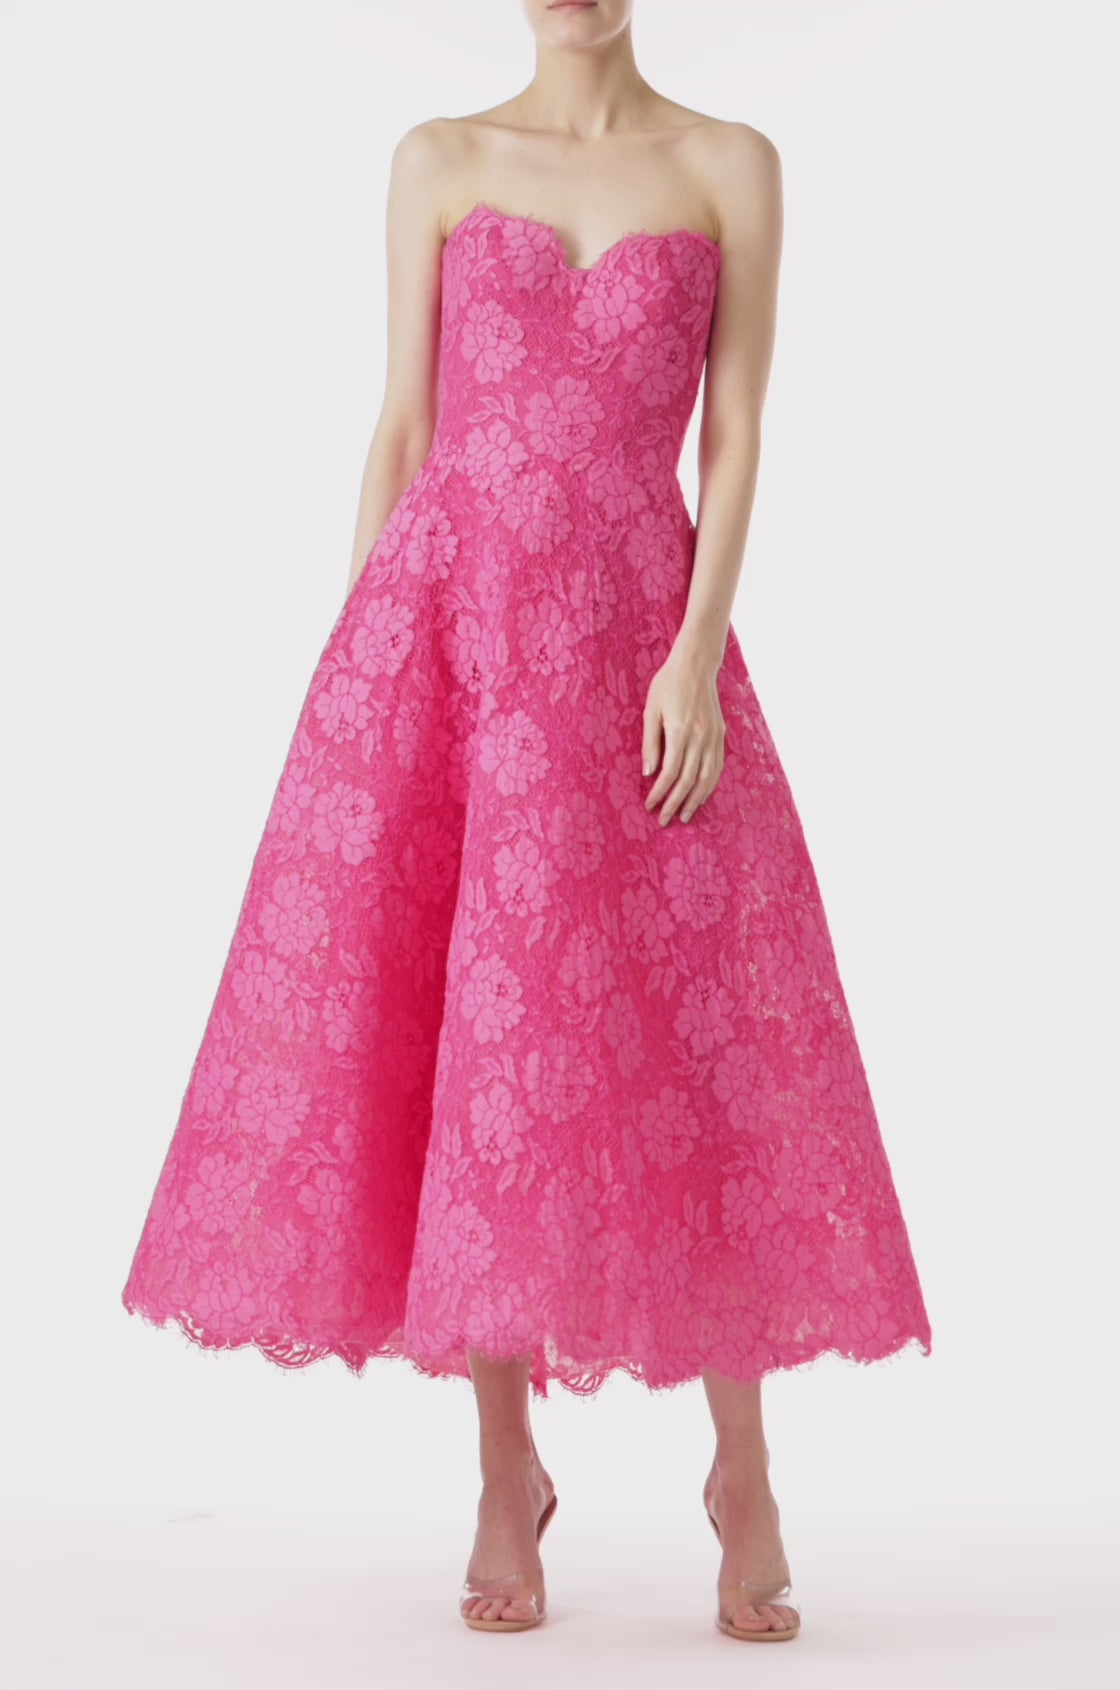 Monique Lhuillier strapless pink lace cocktail dress with full skirt.